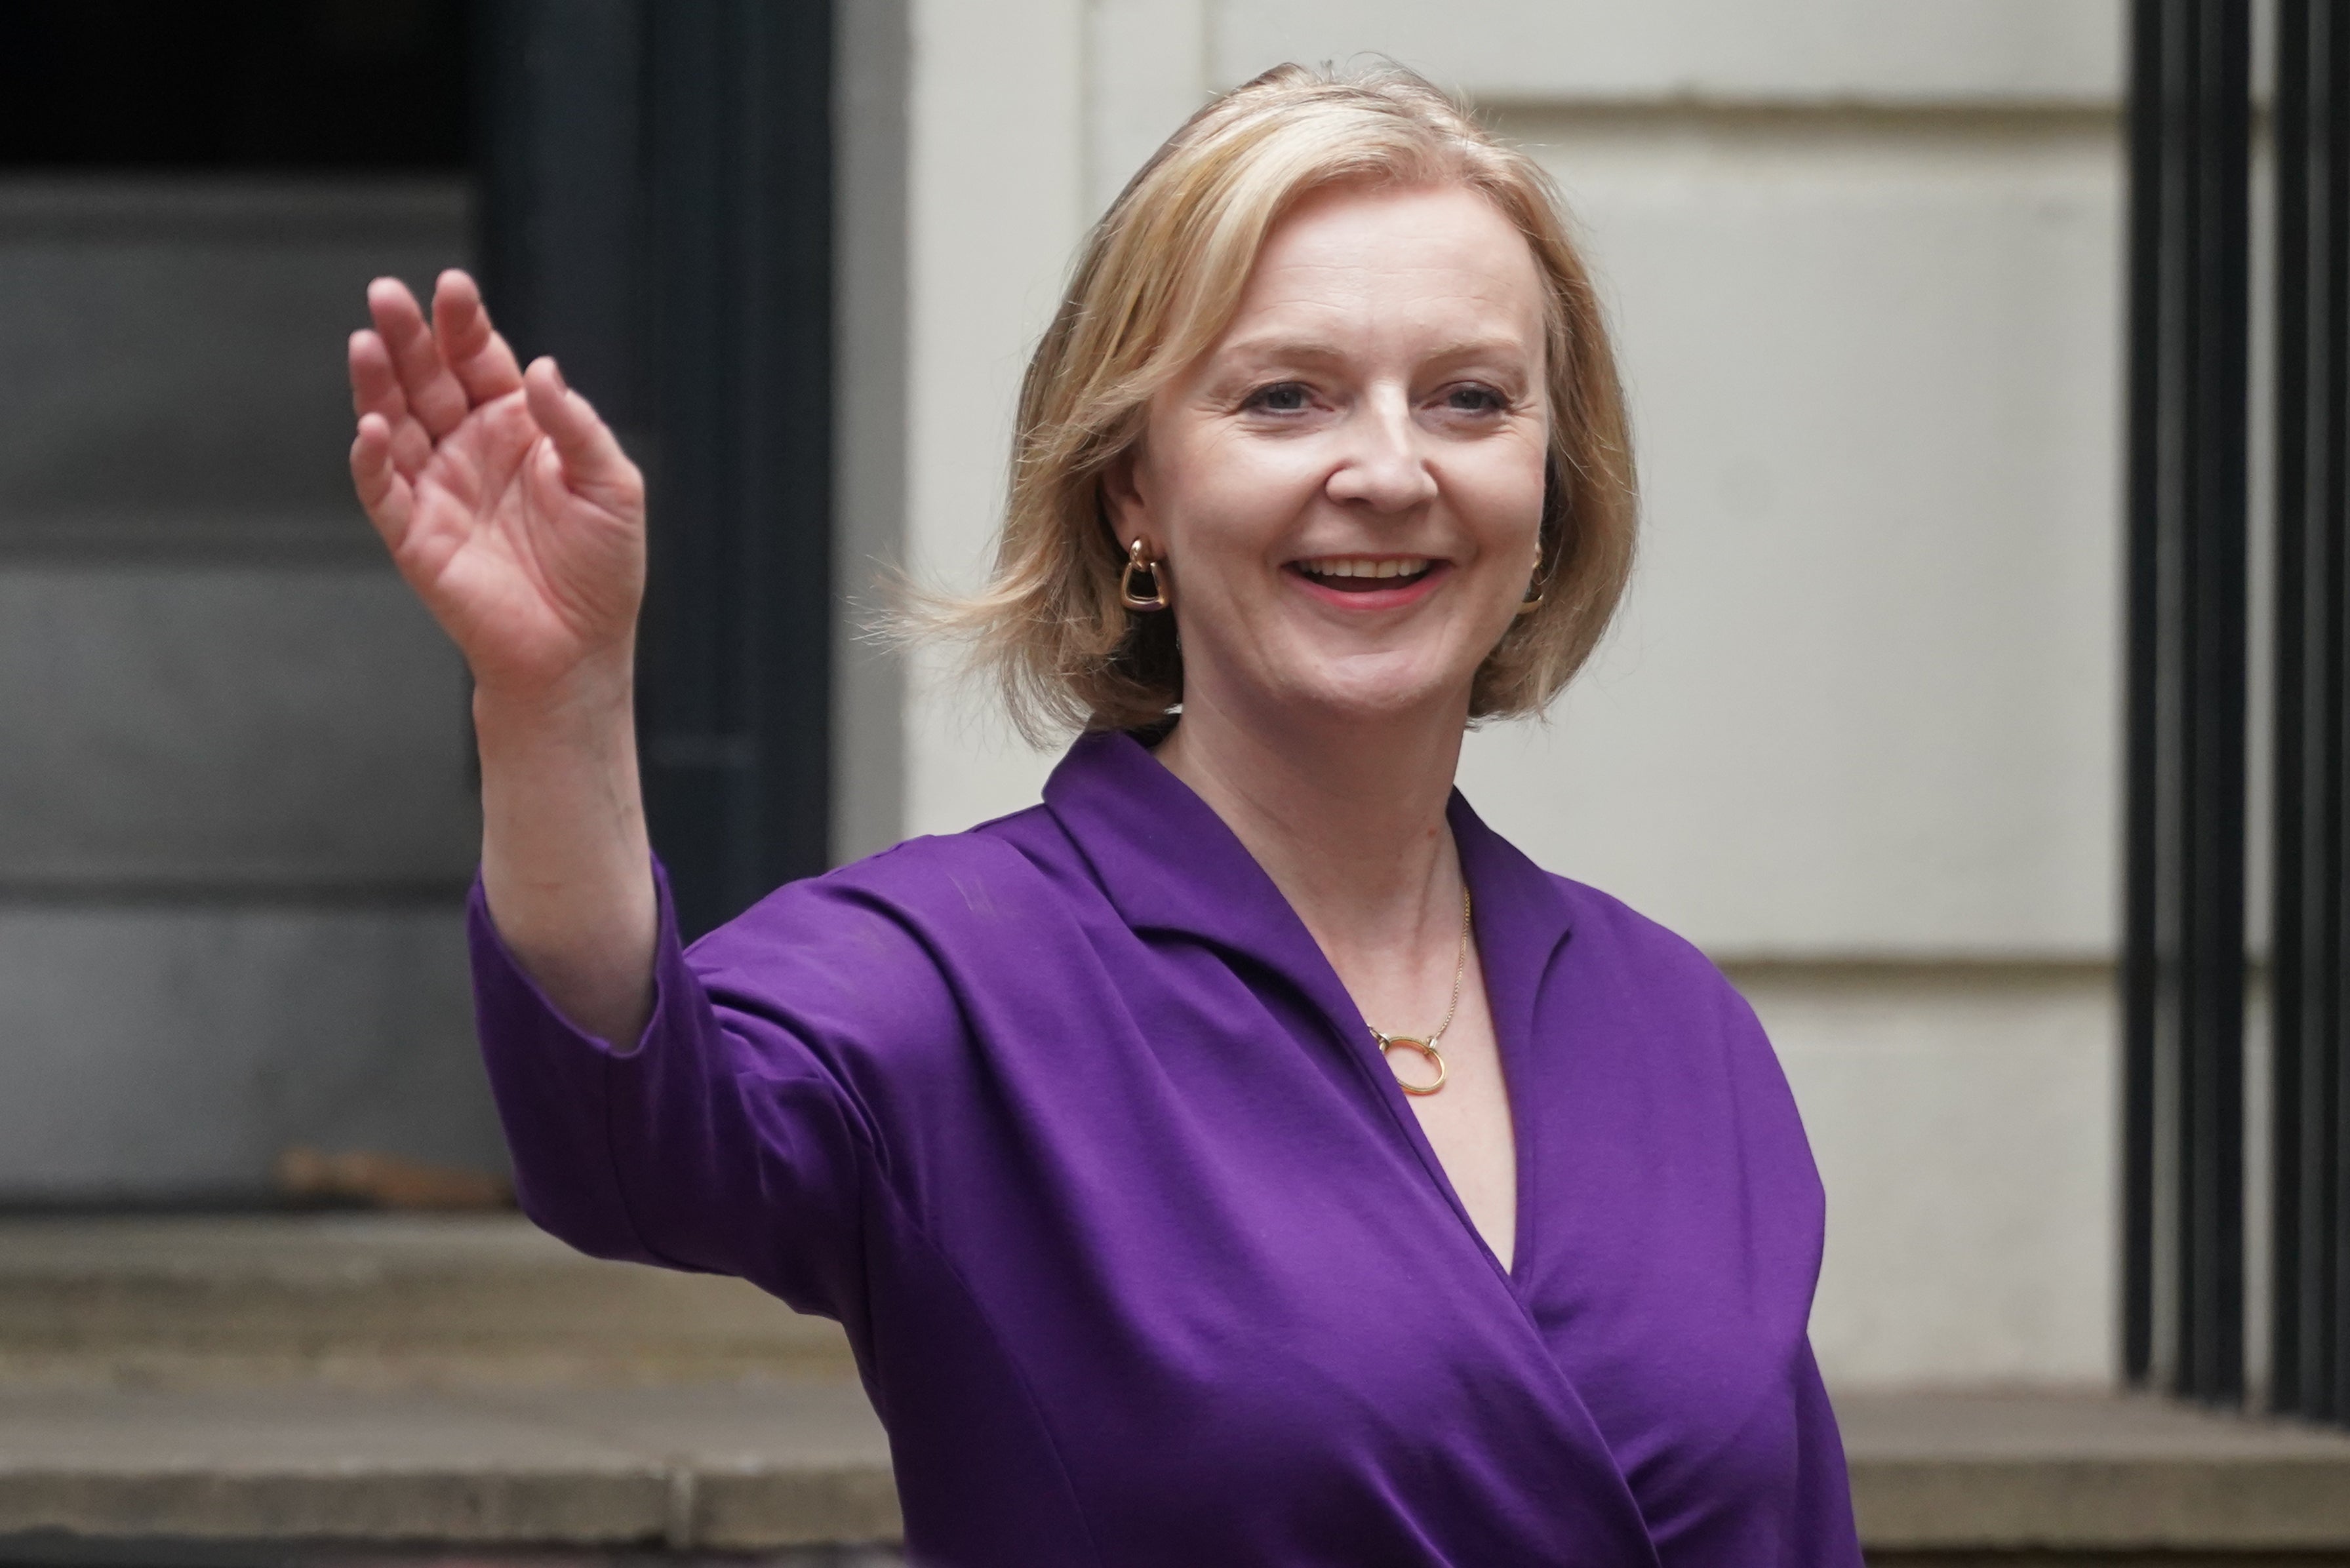 Liz Truss has ‘no time to waste’ in tackling issues such as the cost of living, Nicola Sturgeon said (Victoria Jones/PA)